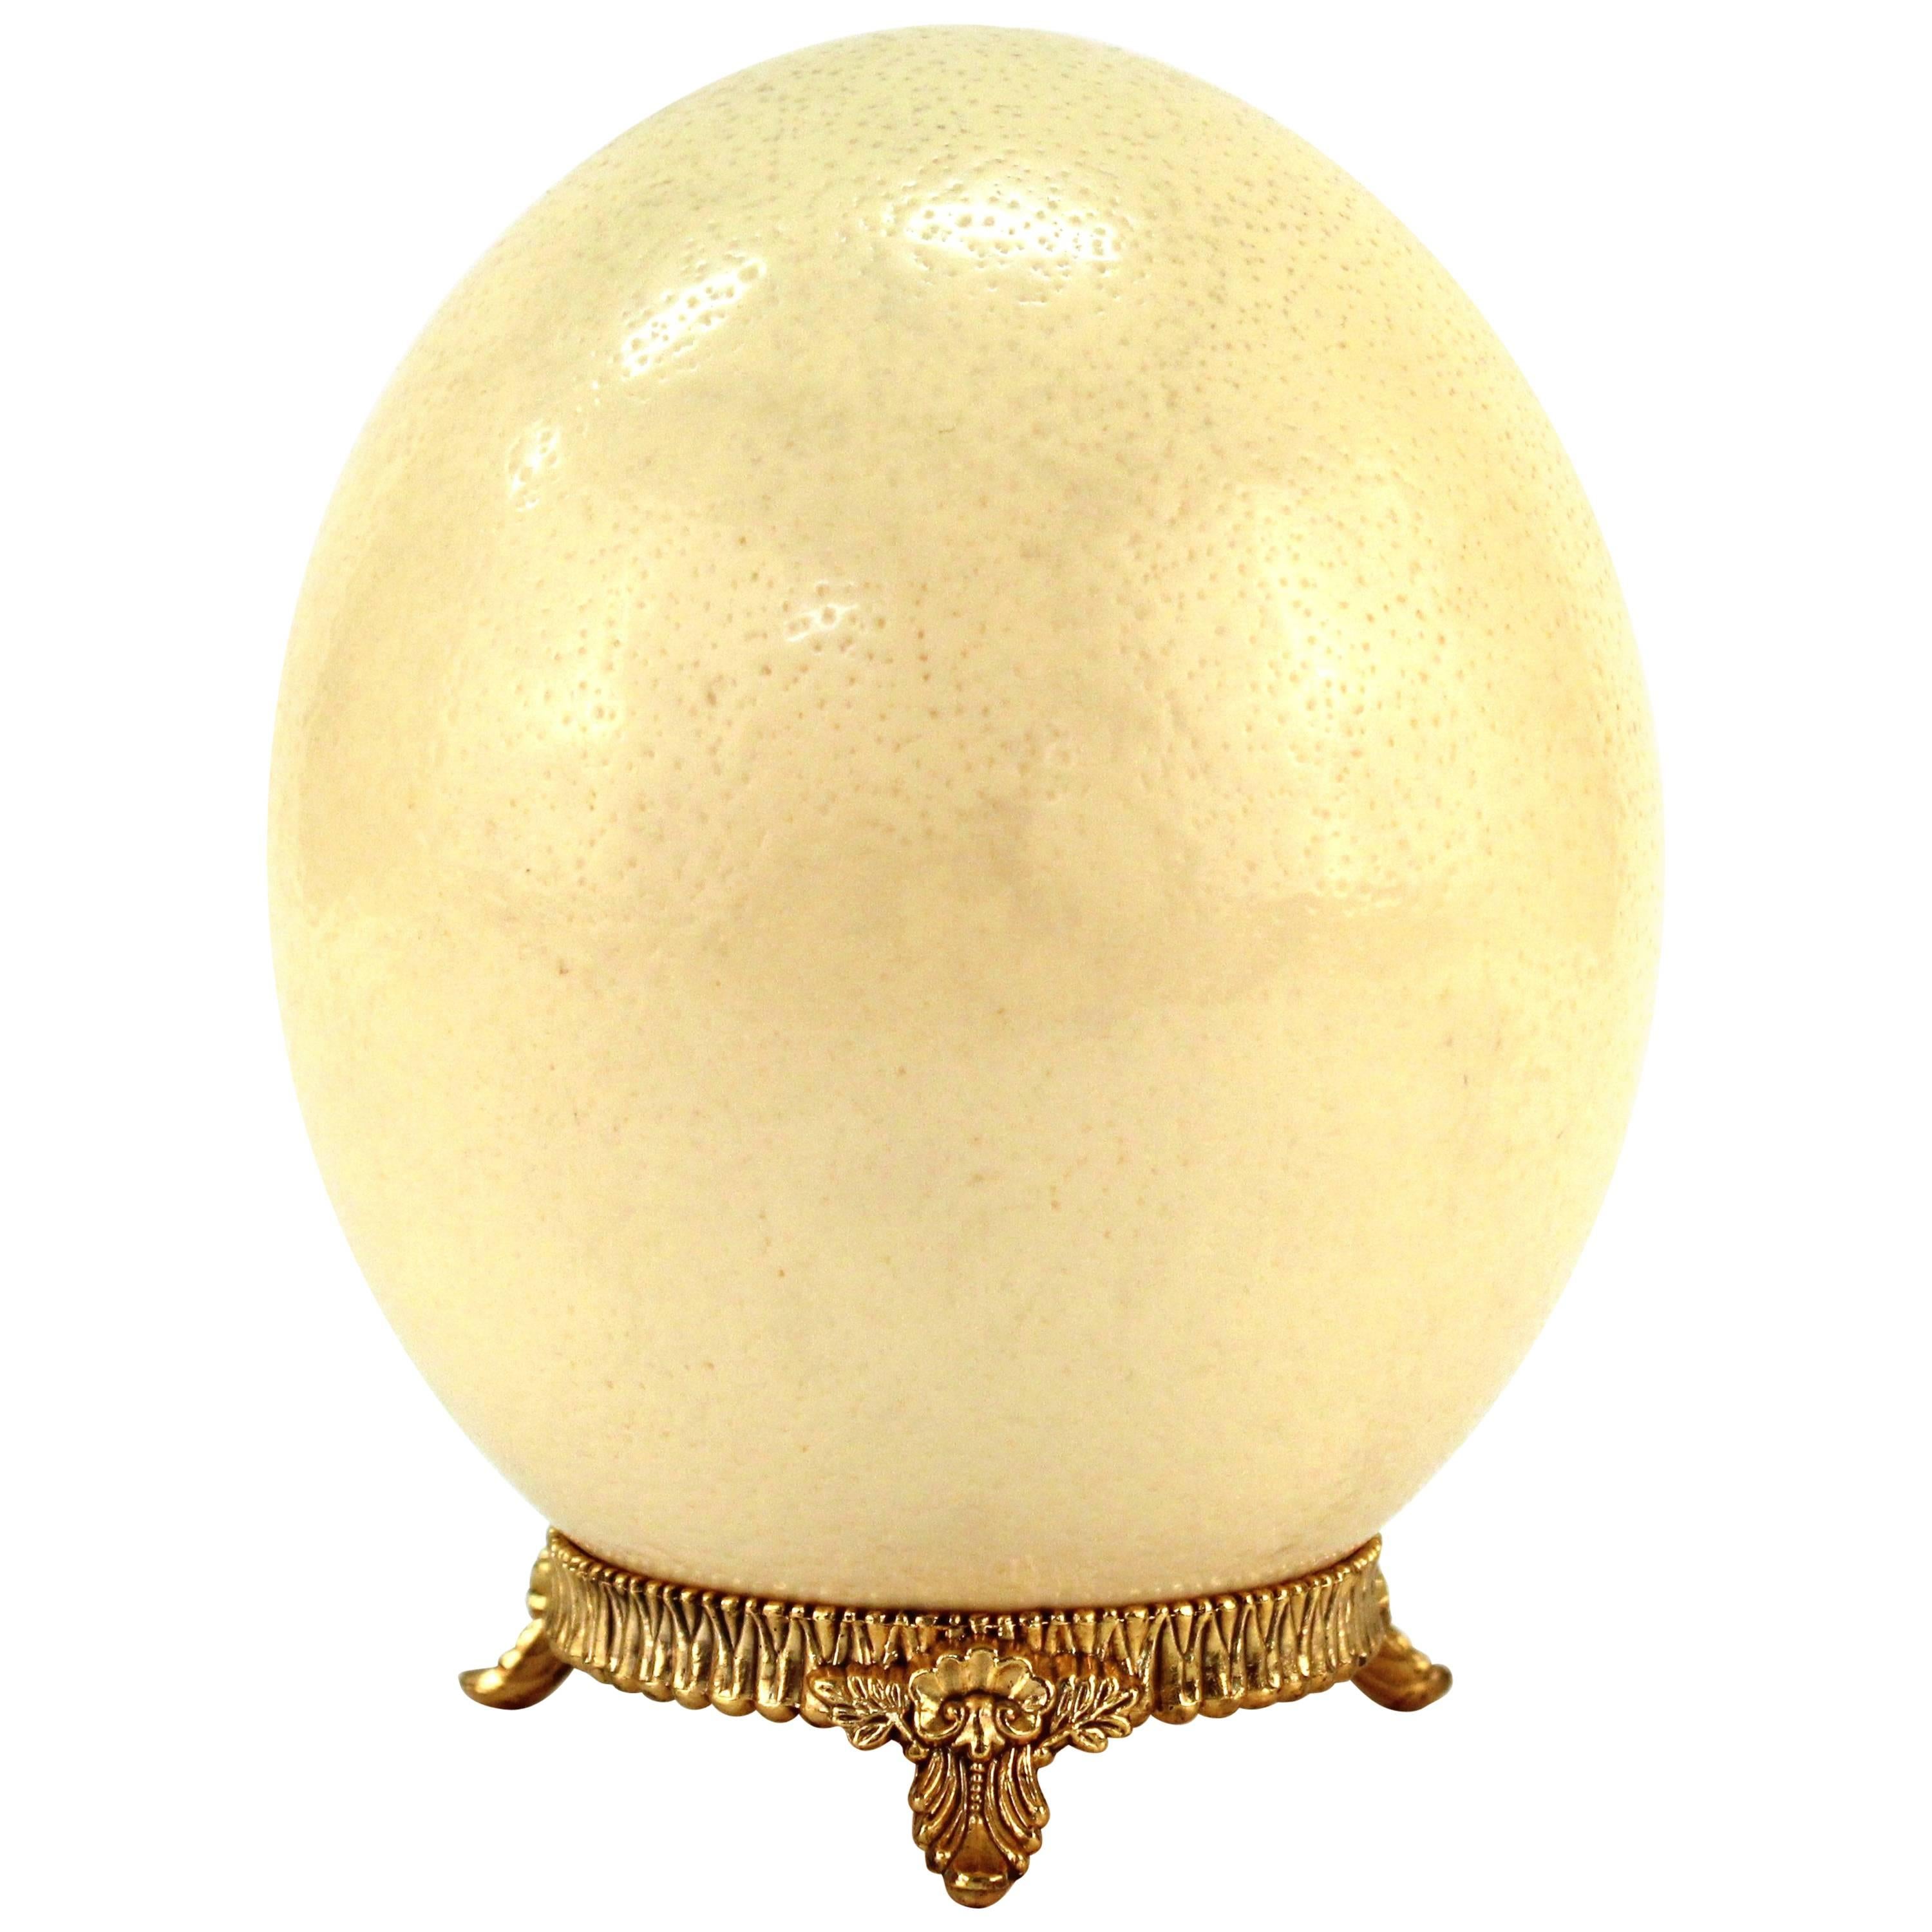 20 PERSPEX GOLD EGG STANDS COLLECTABLES for STONE EGGS  SPHERES  3 cms DIAMETER 